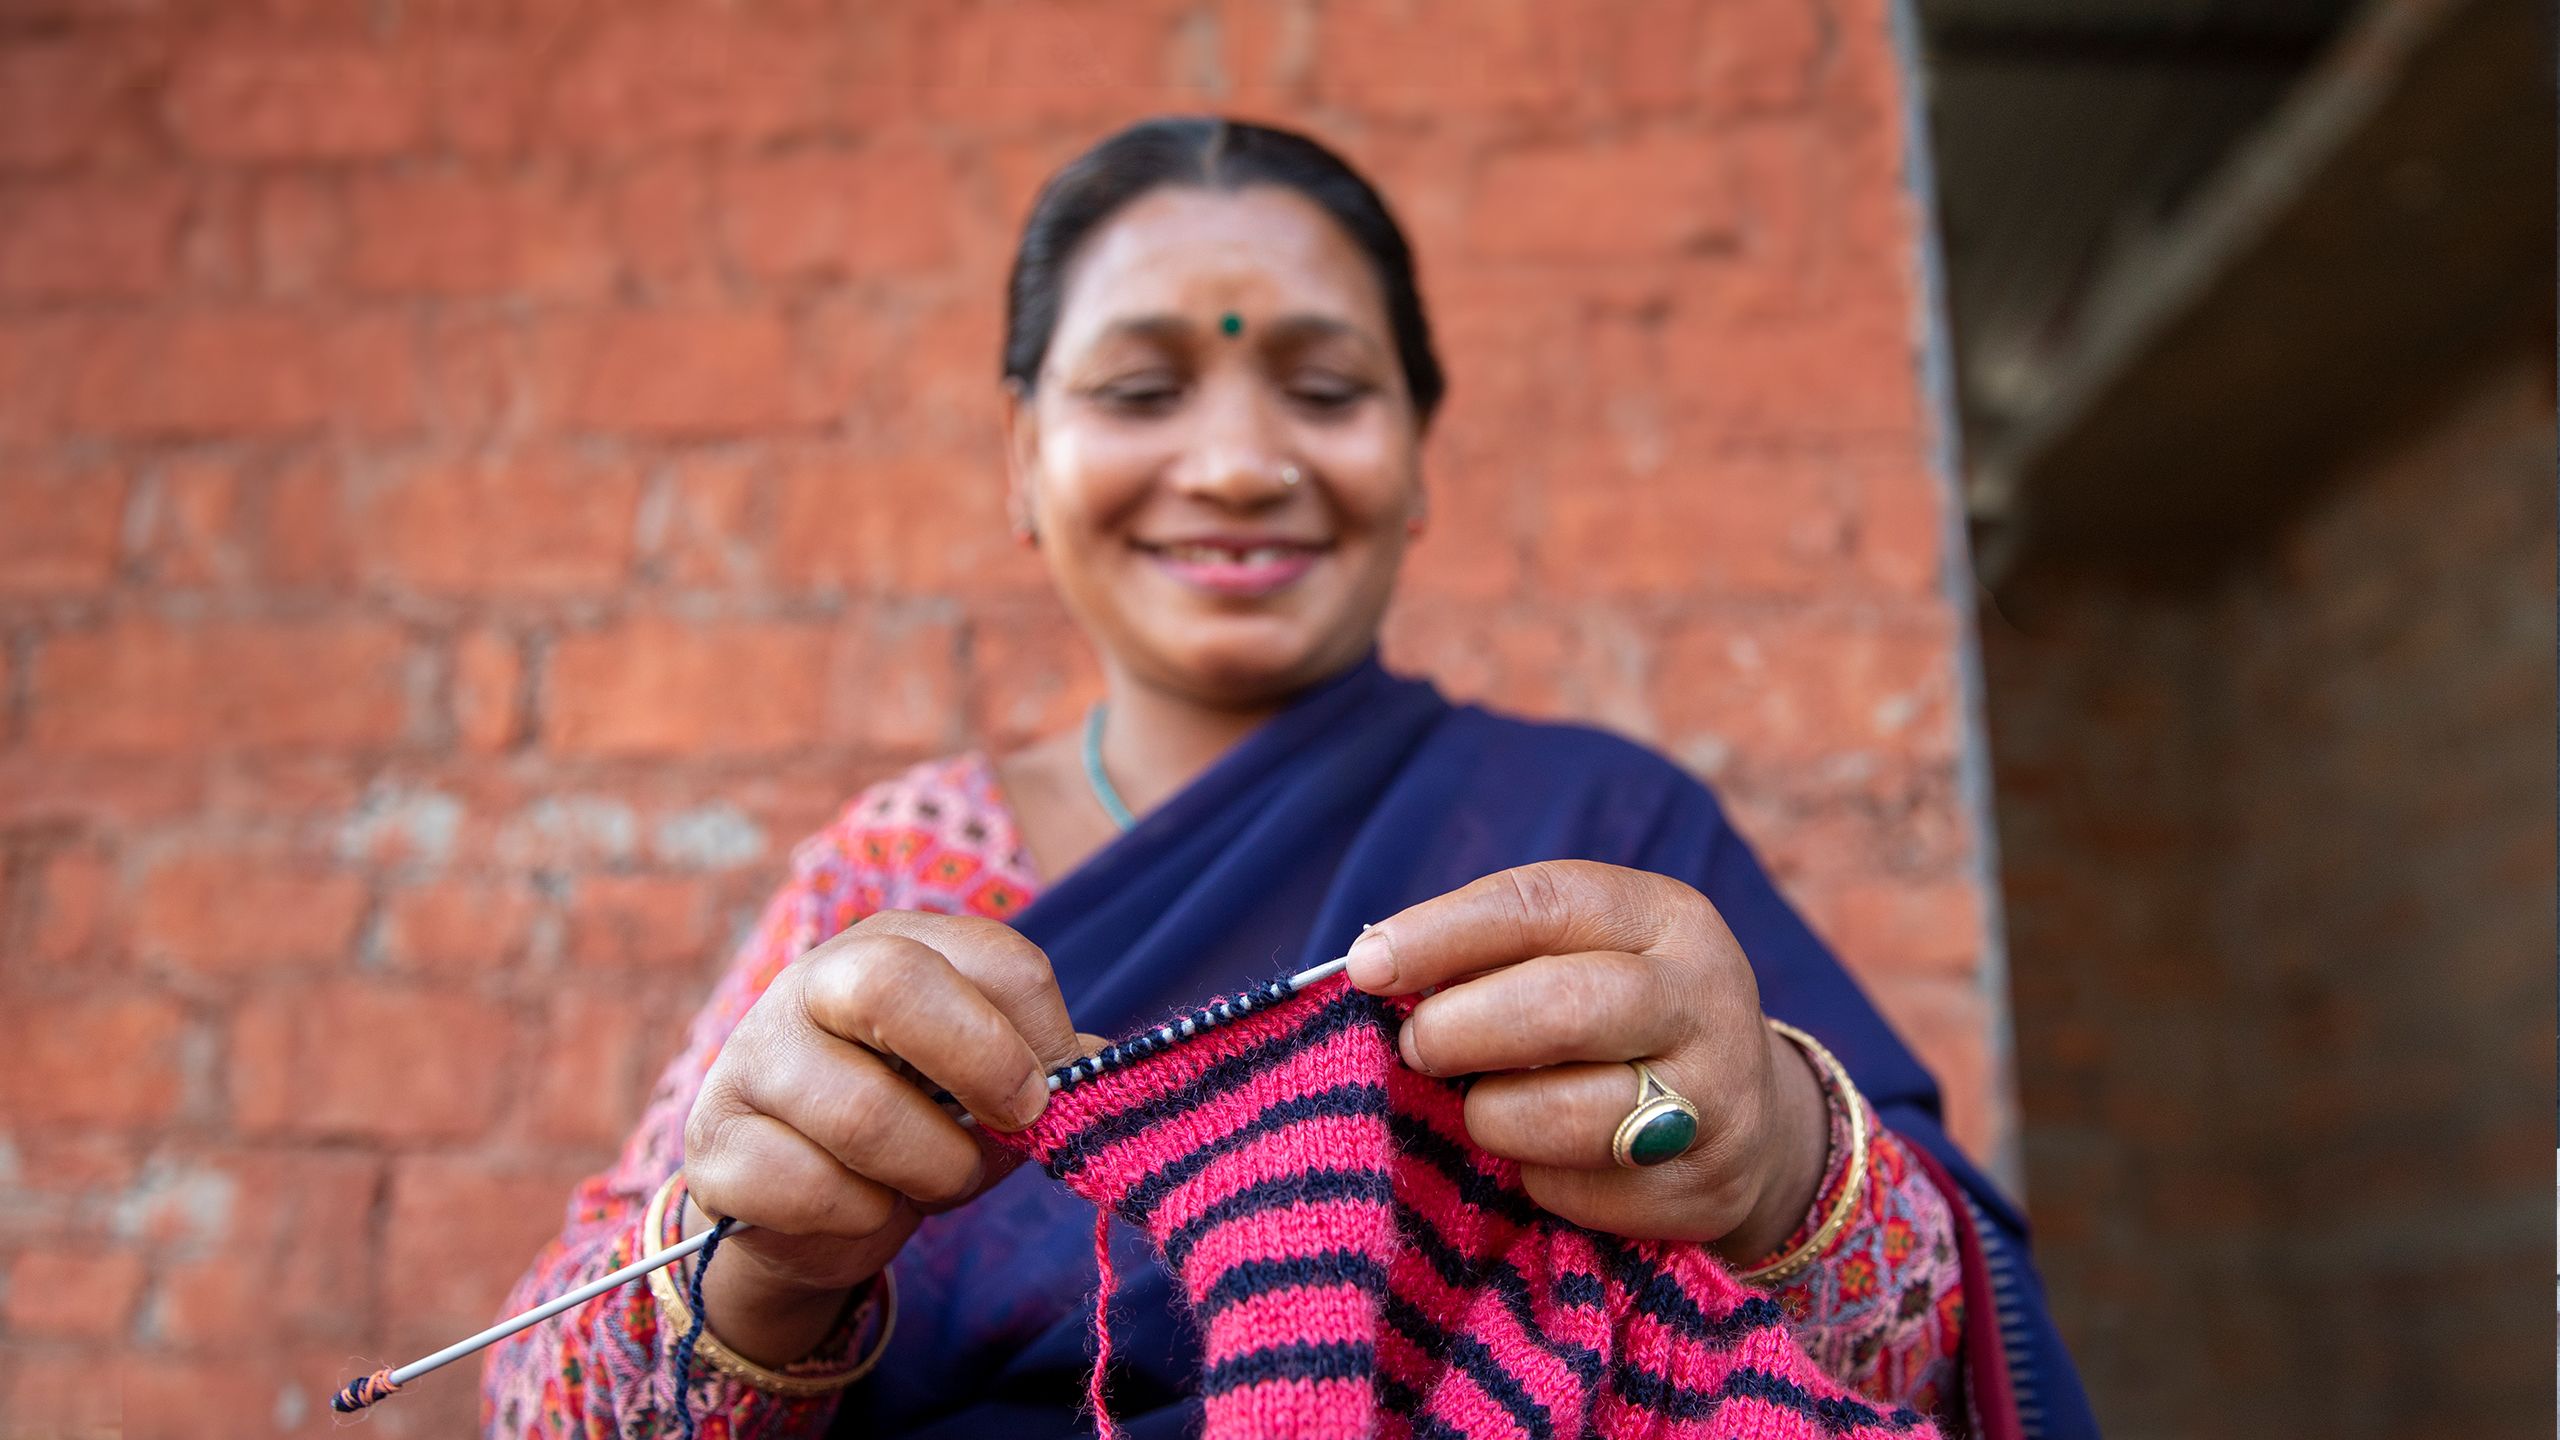 A woman in a sari knits a pink and navy striped sweater in front of a brick wall.